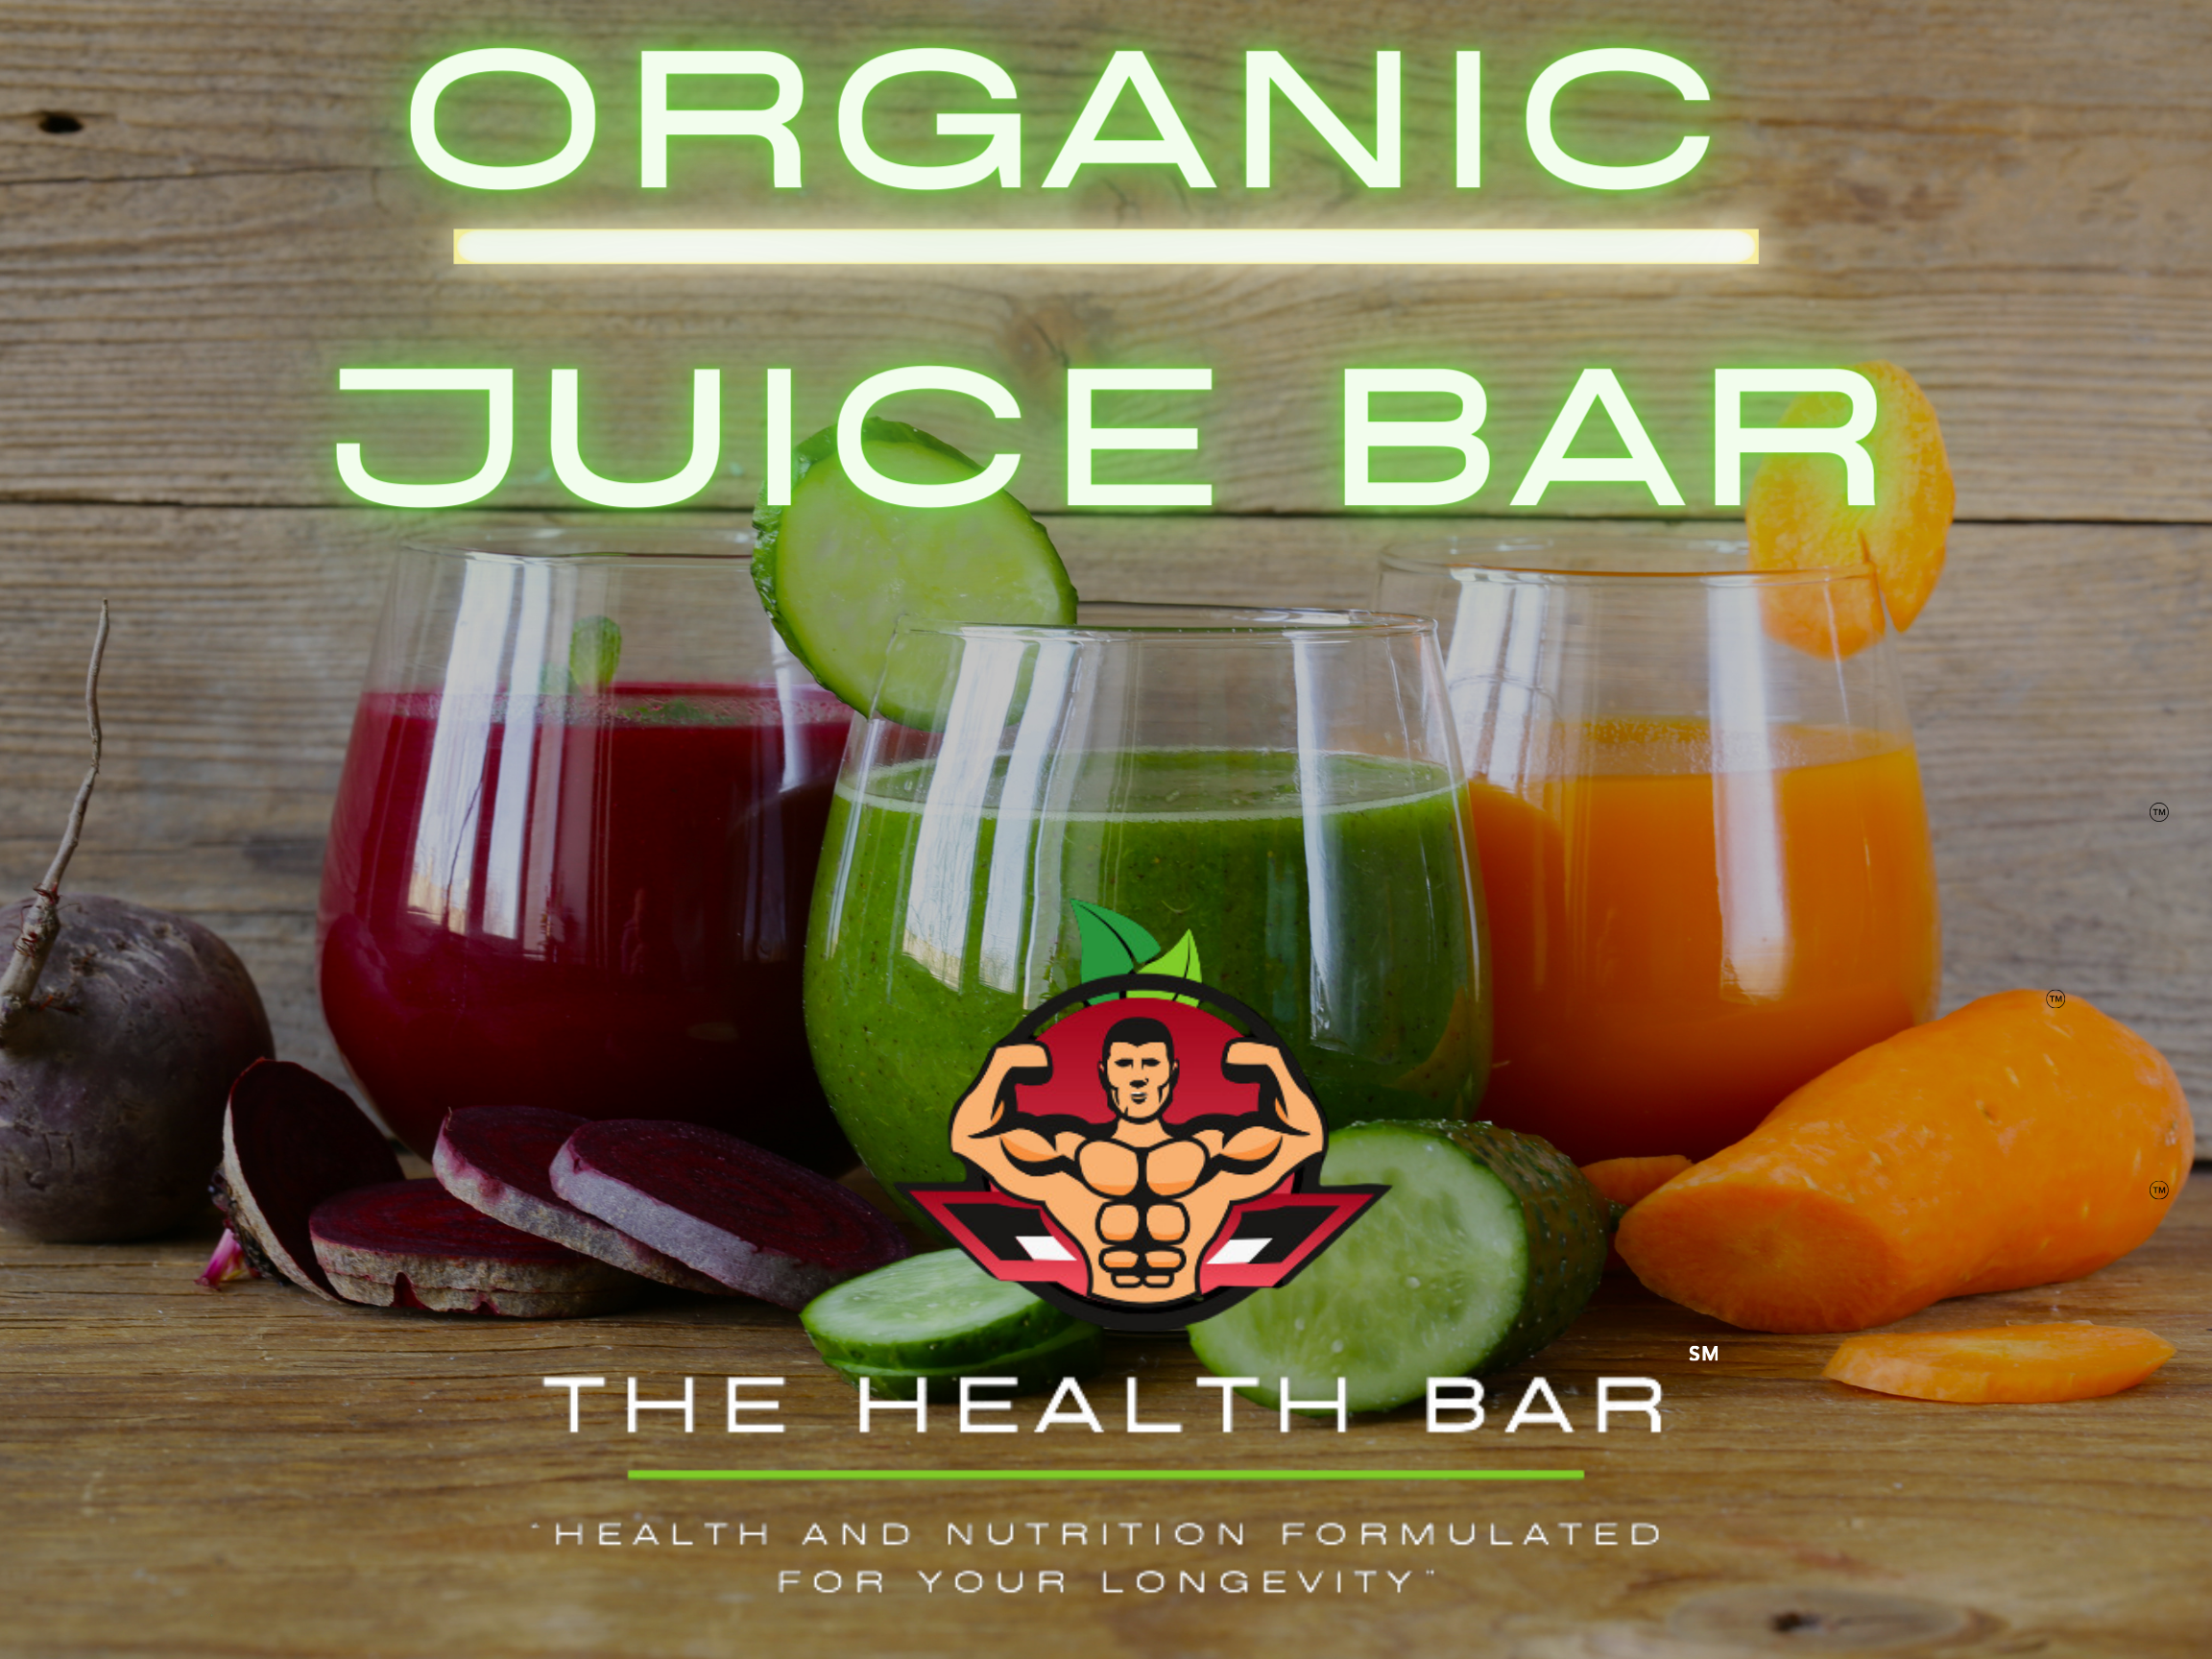 Health-Foods-Store-Organic-Juice-Bar-Healthy-Meal-Prep-Near-Me-in-Roswell-GA-The-Health-Bar-West-Roswell-